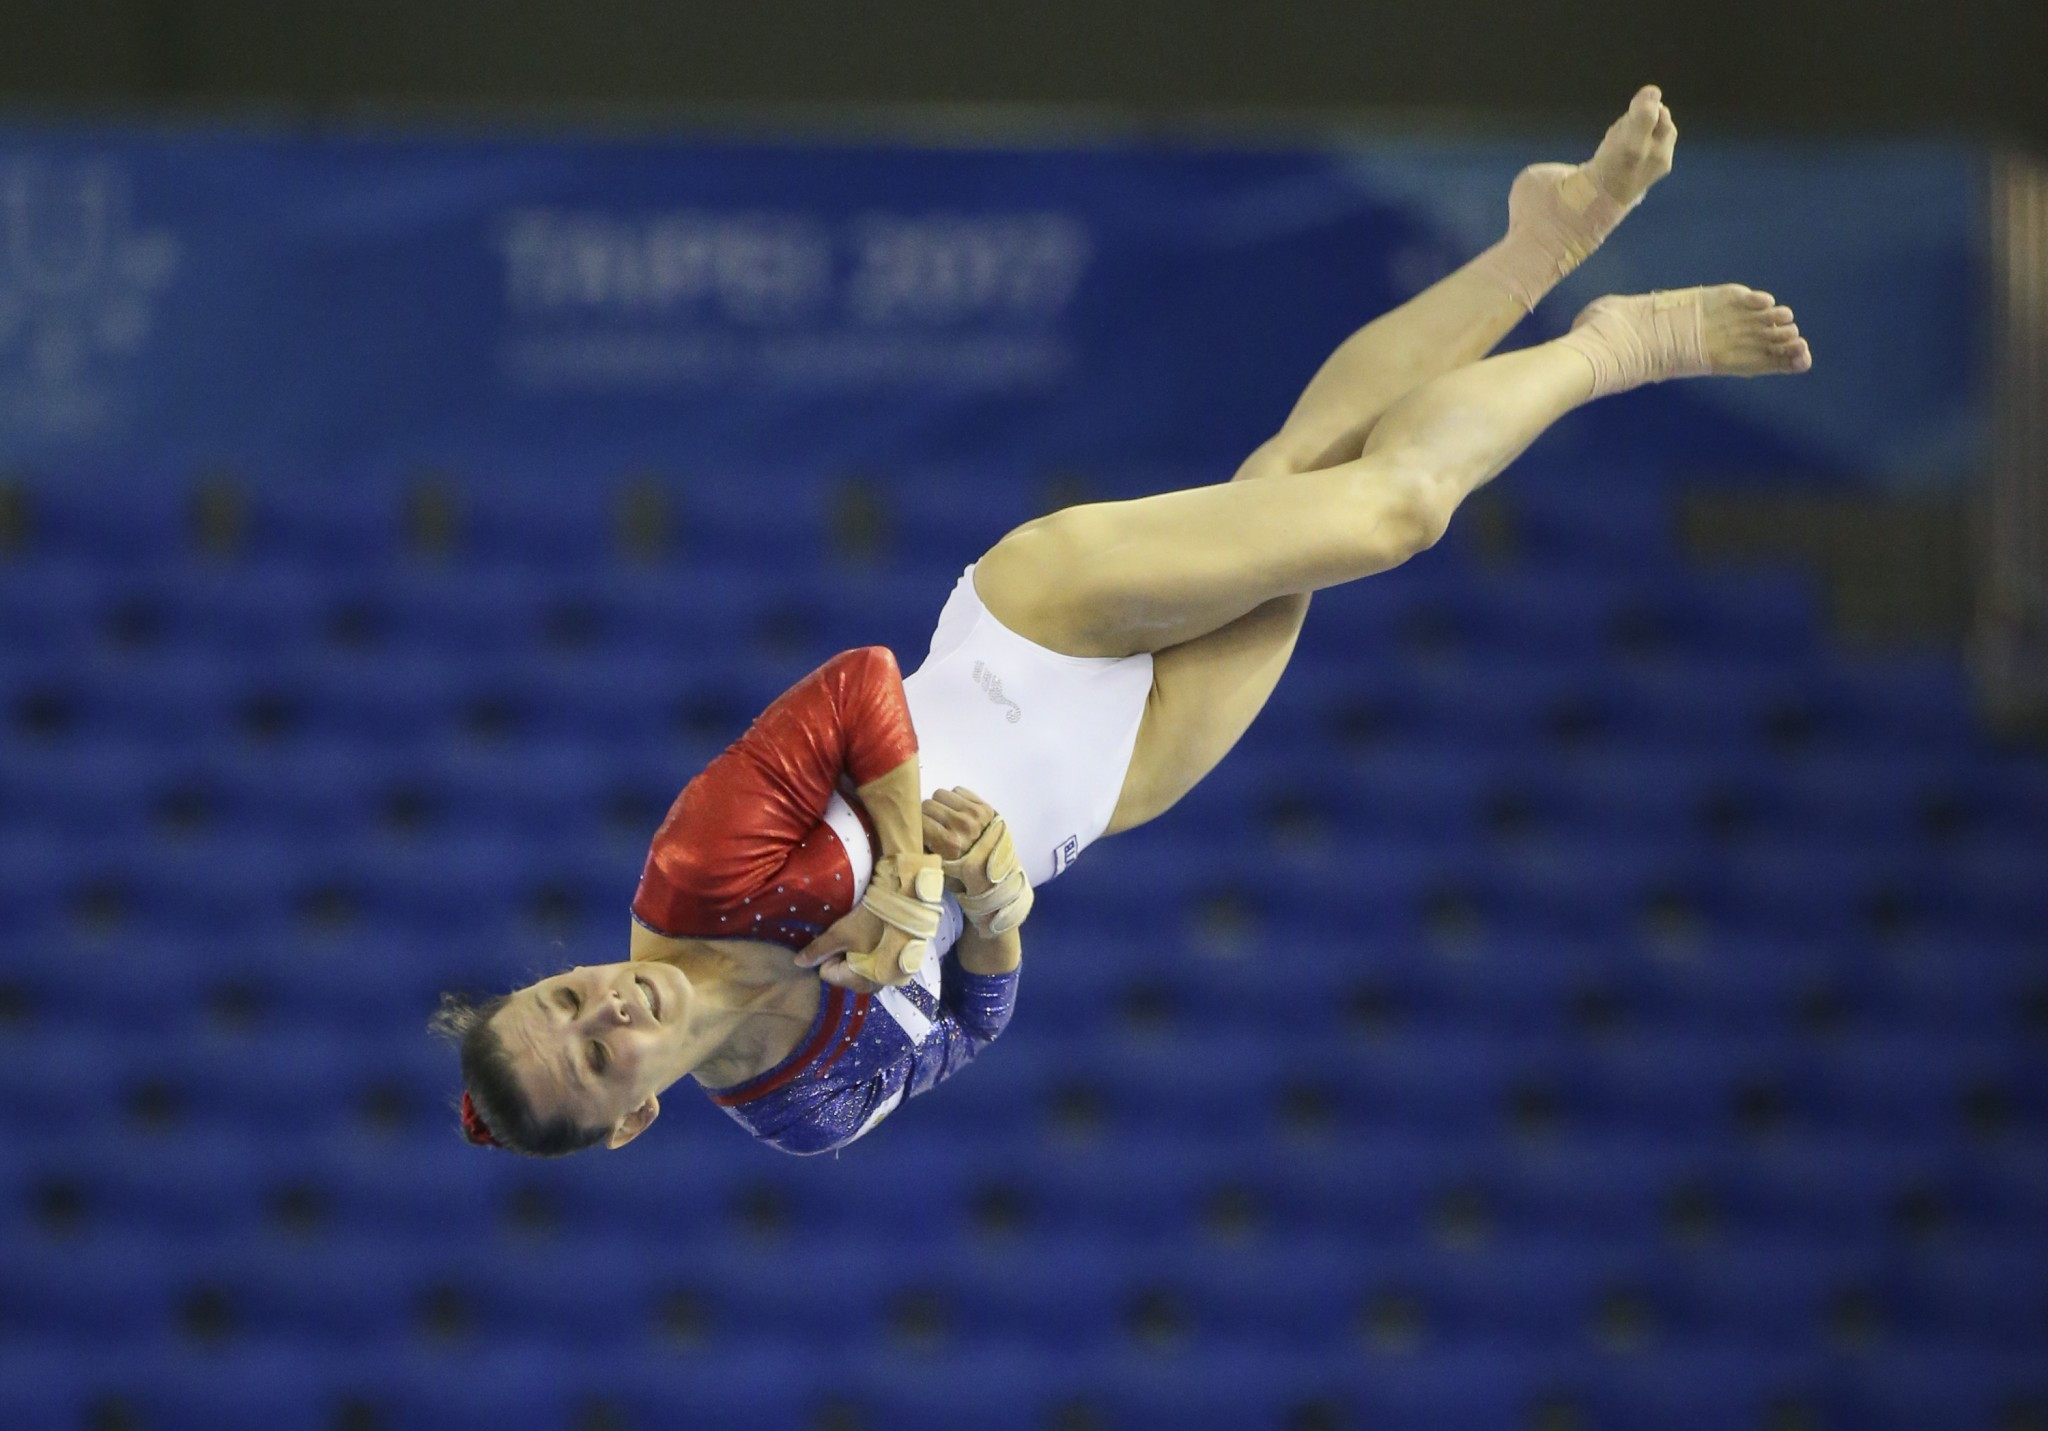 Russia edged Canada to gold in the women's team gymnastics event ©Taipei 2017